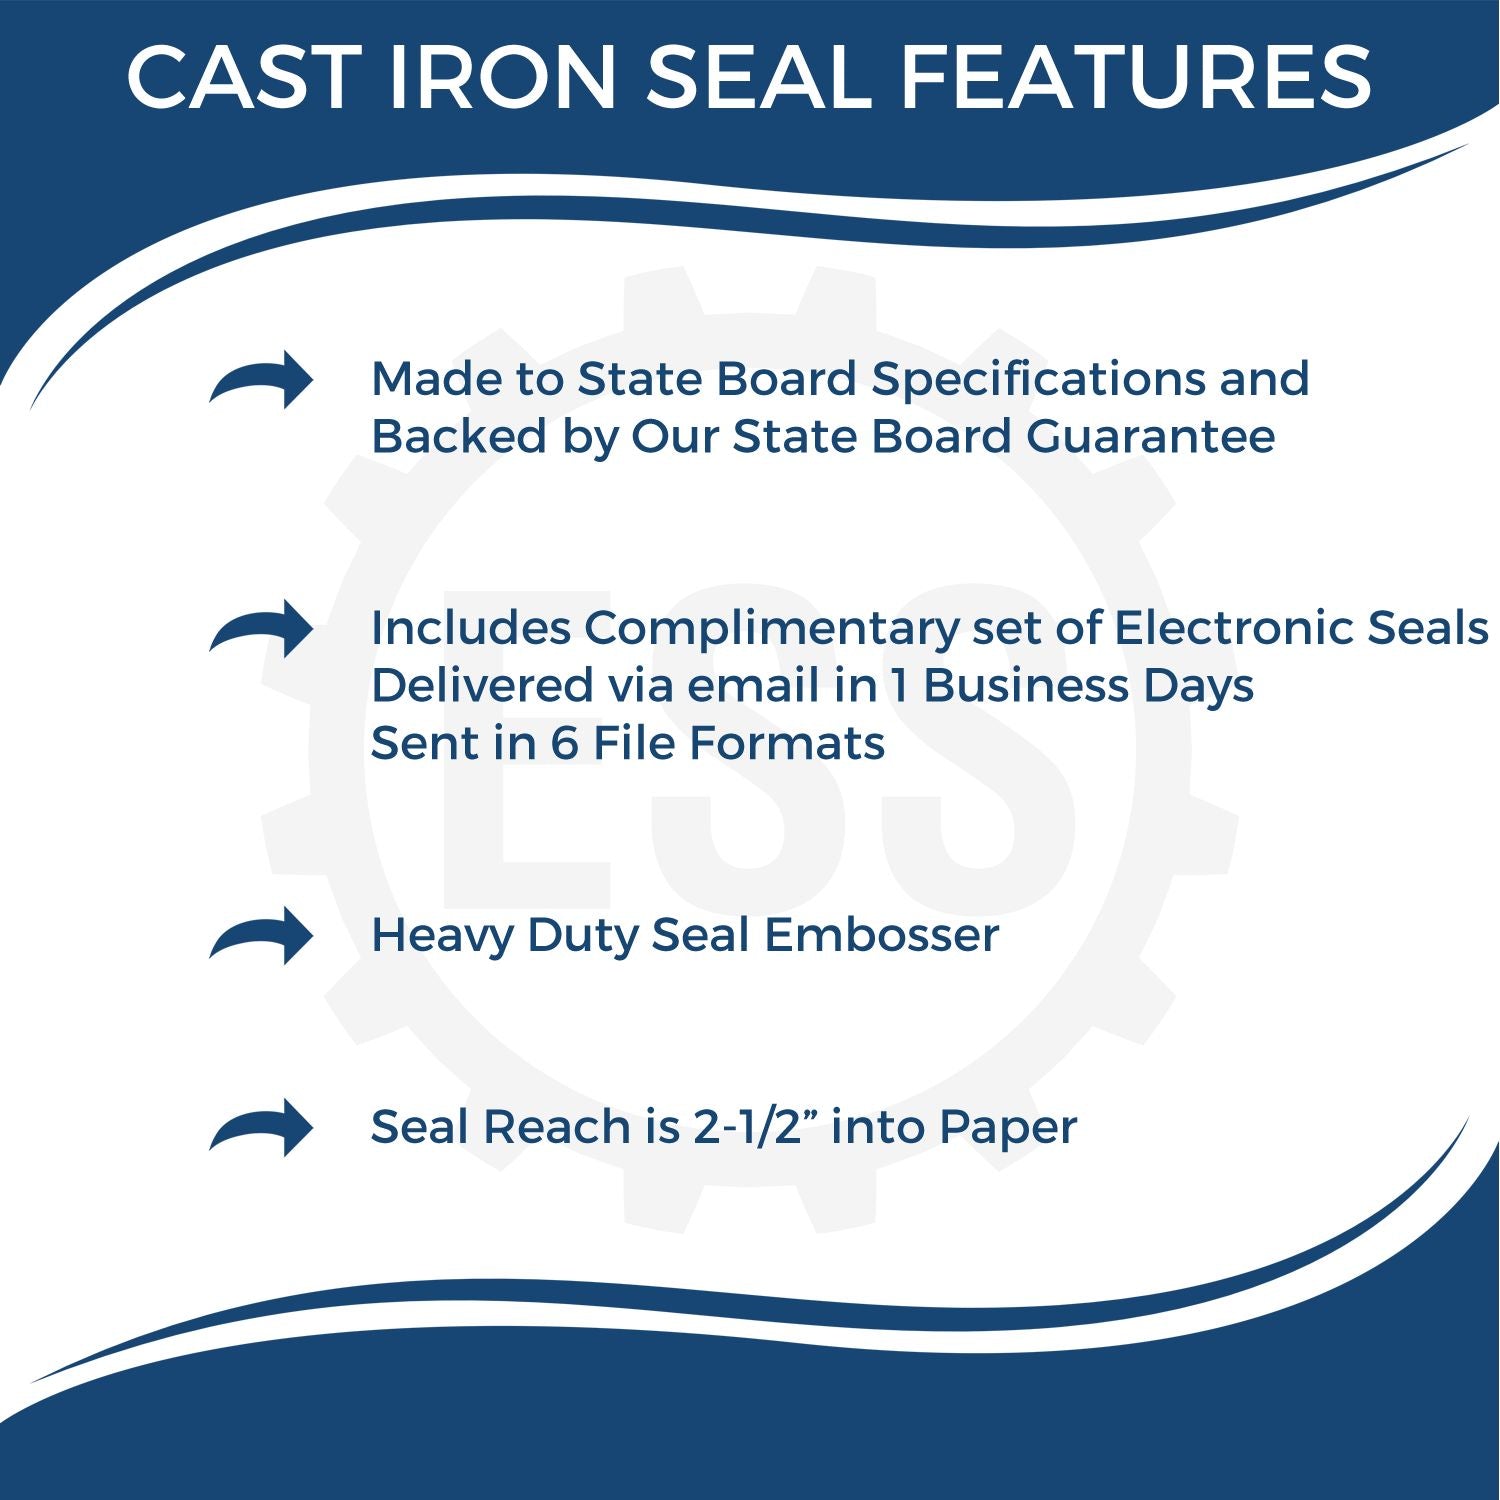 The main image for the Heavy Duty Cast Iron Texas Engineer Seal Embosser depicting a sample of the imprint and electronic files